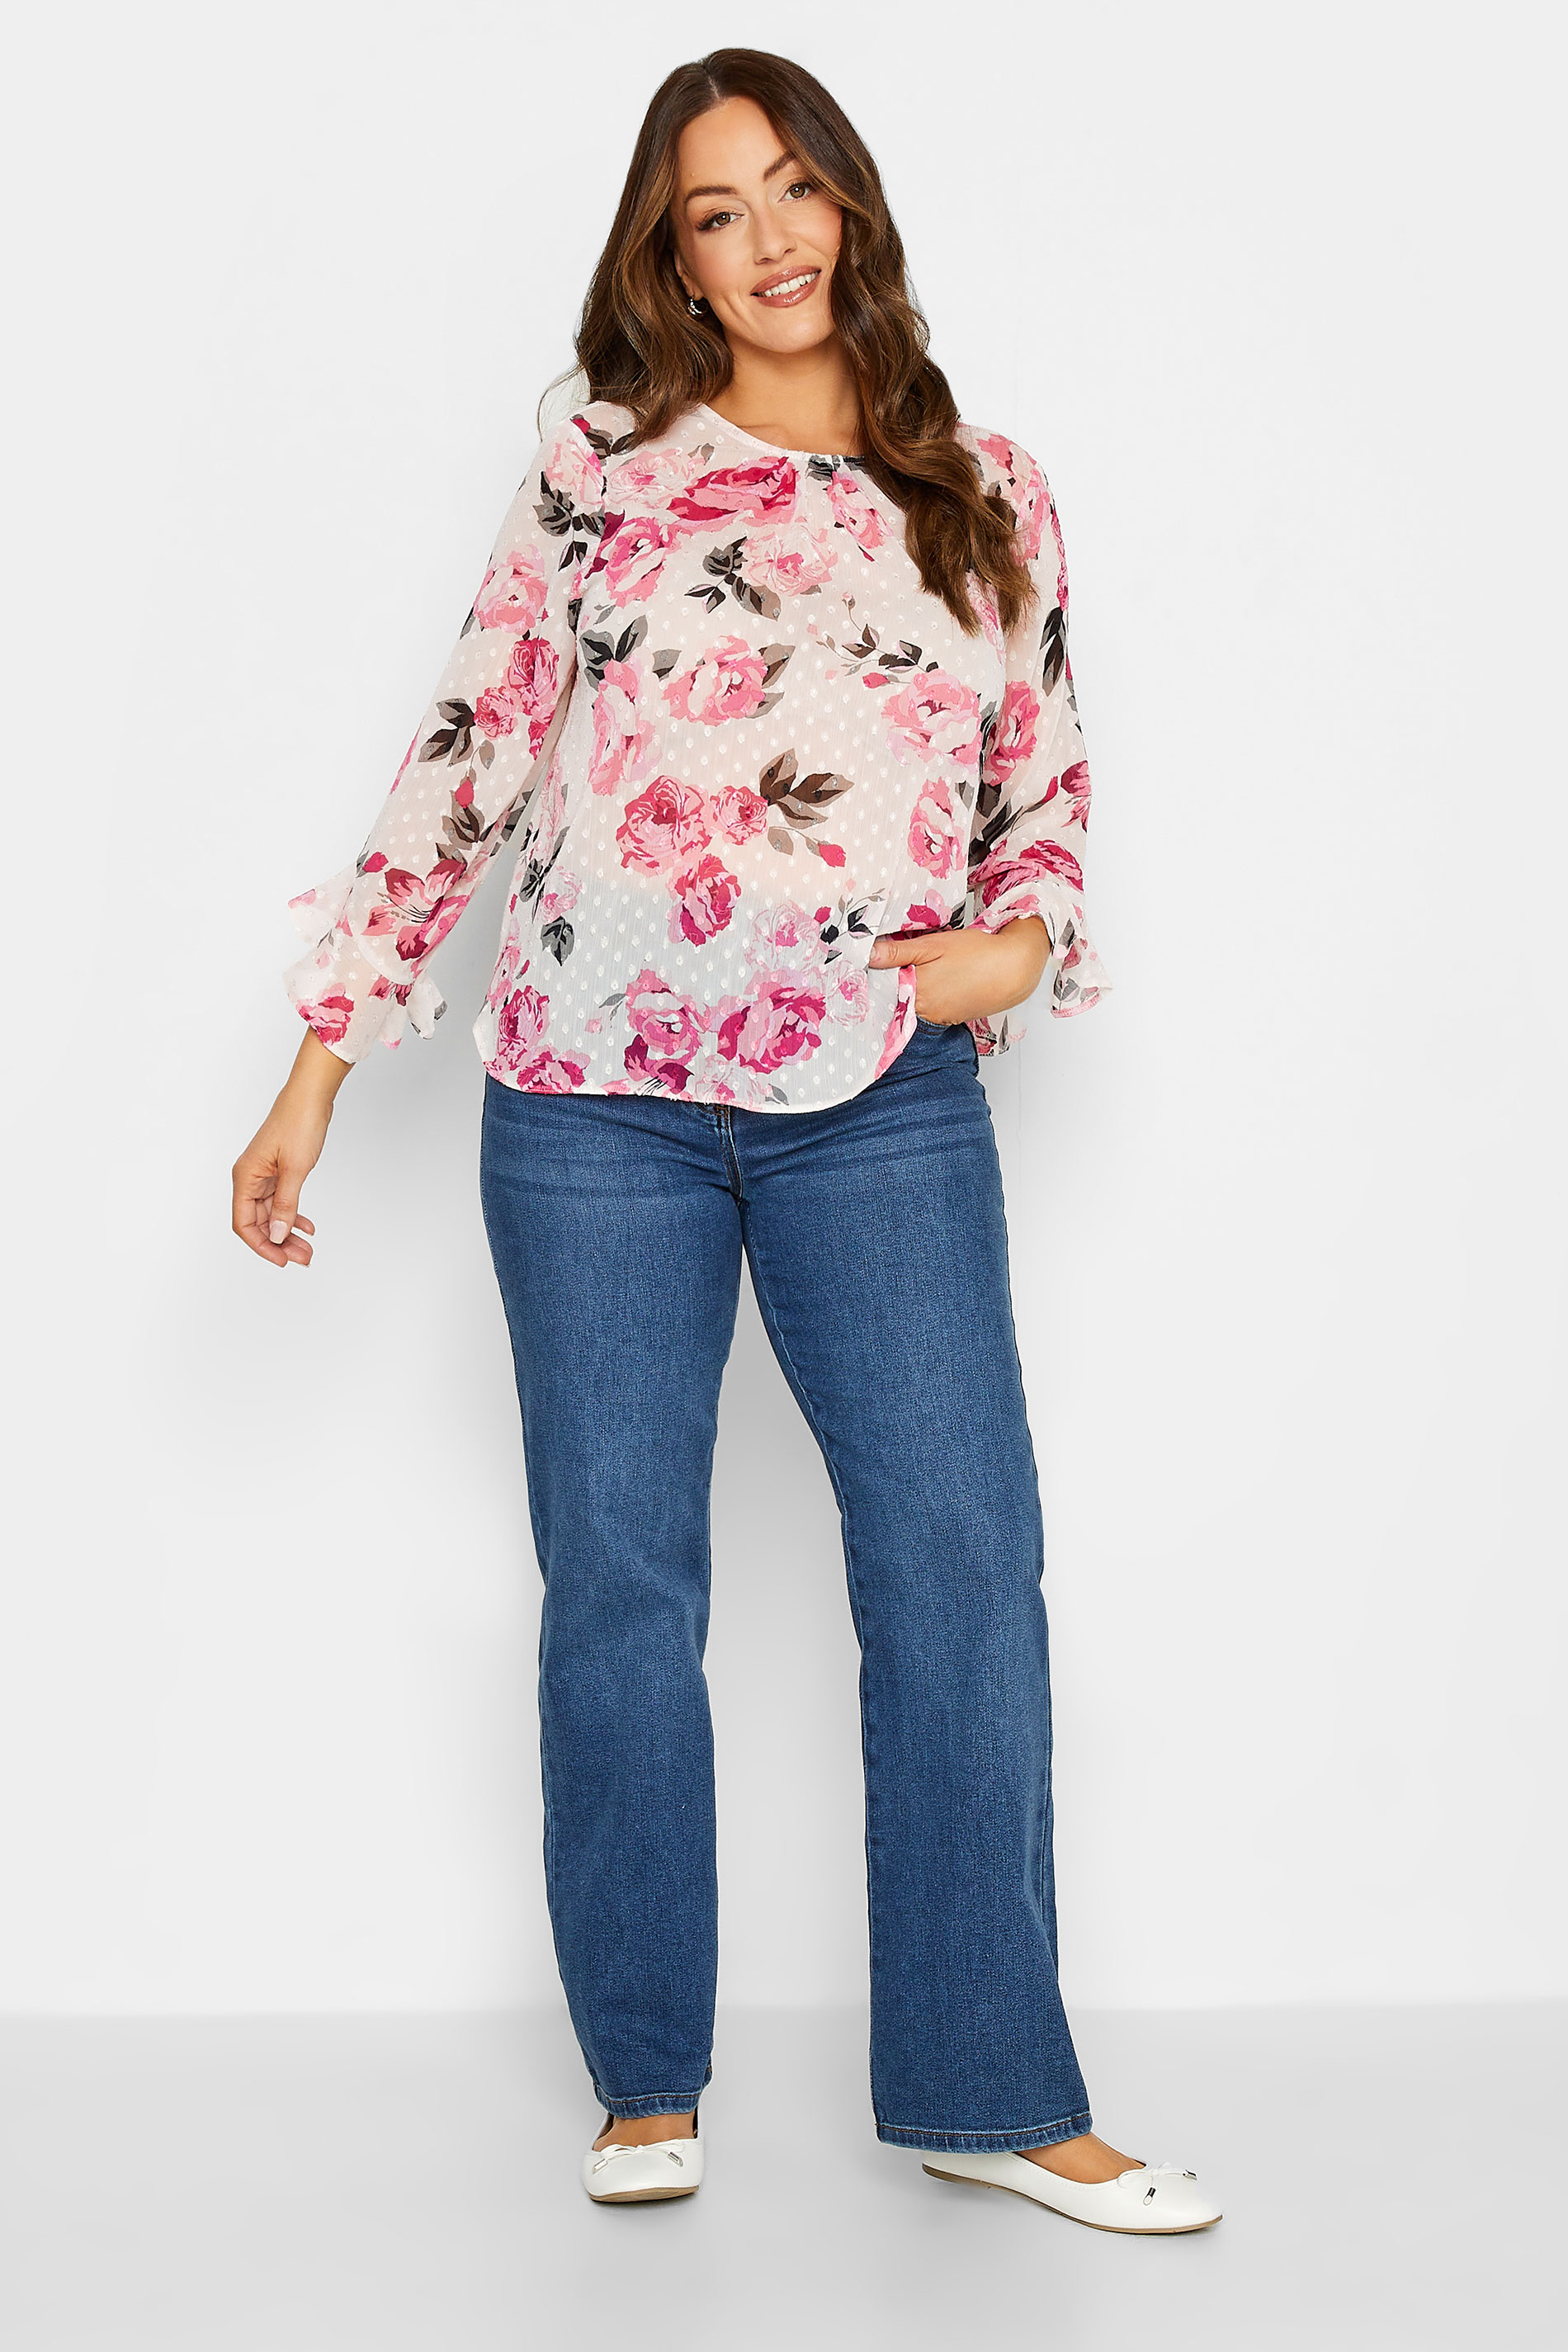 M&Co White Floral Print Dobby Frill Sleeve Blouse | M&Co 2